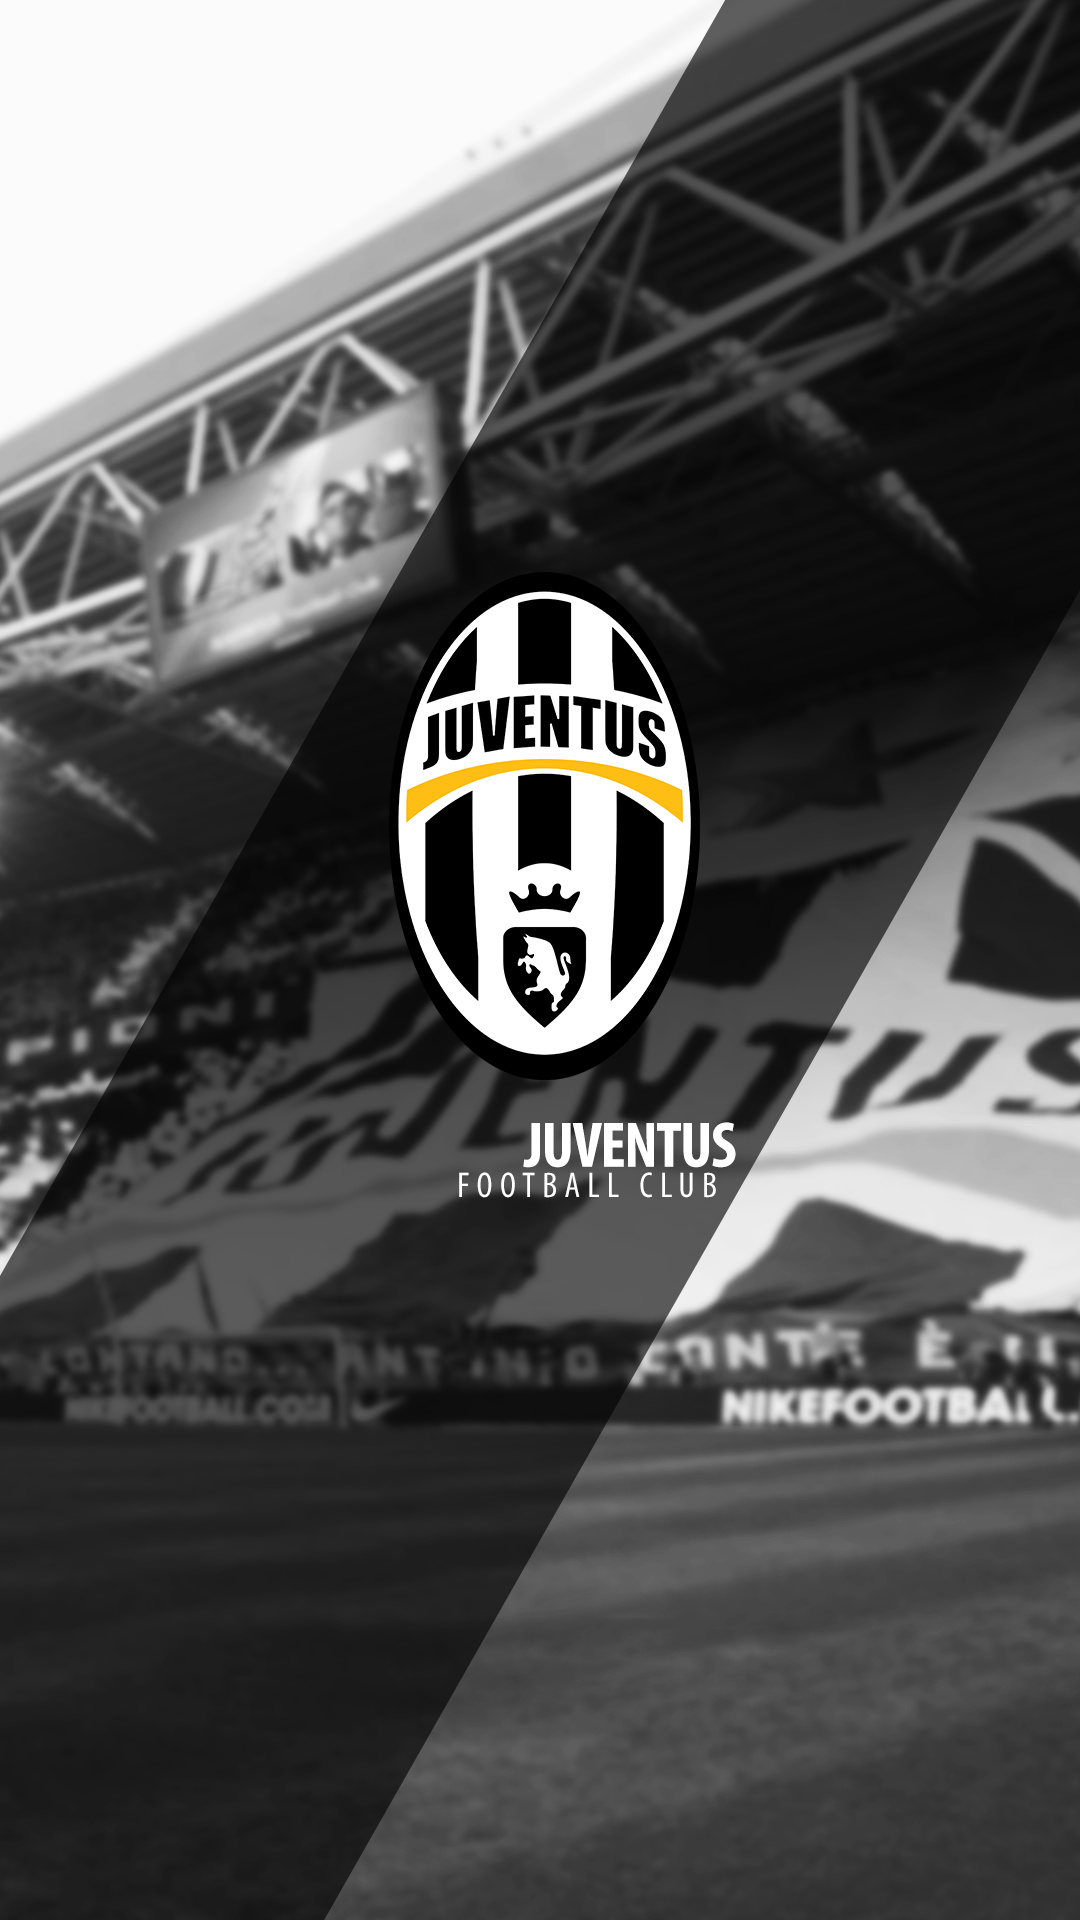 Juventus: The club has worn a black and white striped home kit since 1903. 1080x1920 Full HD Background.